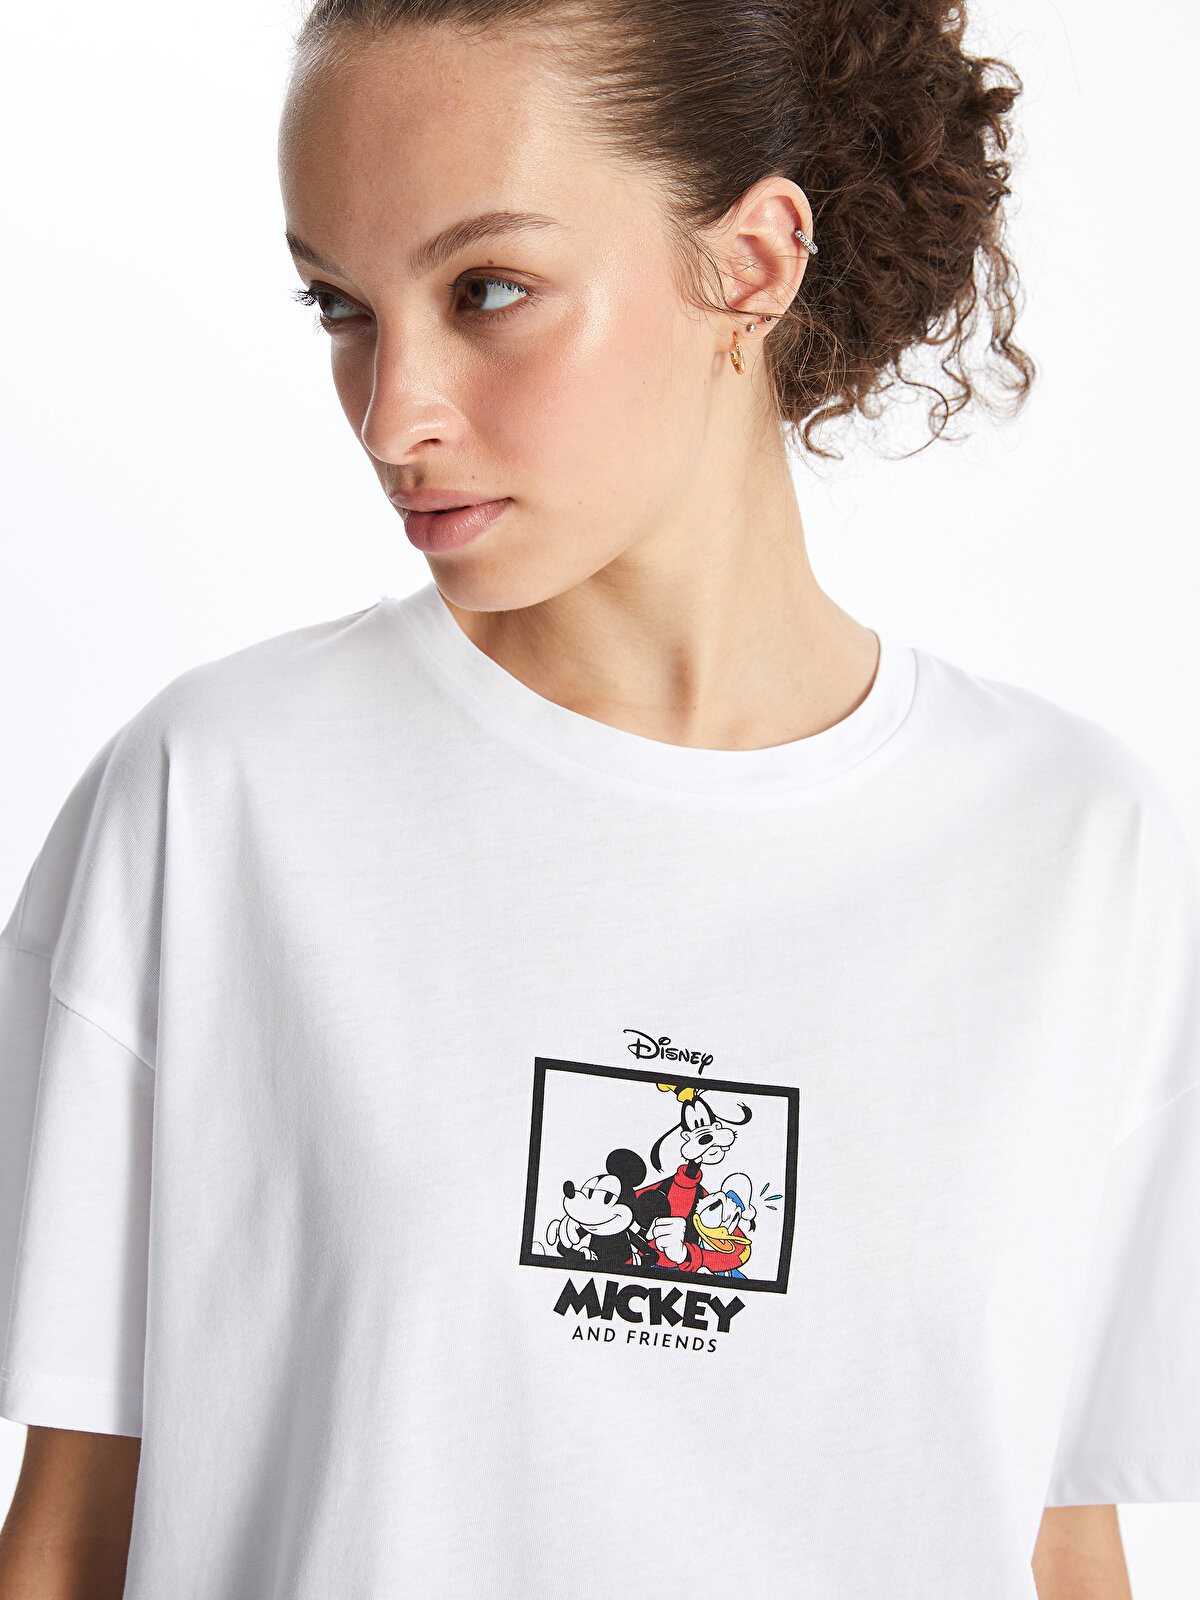 Crew Neck Mickey and Friends Printed Short Sleeve Women's T-Shirt 